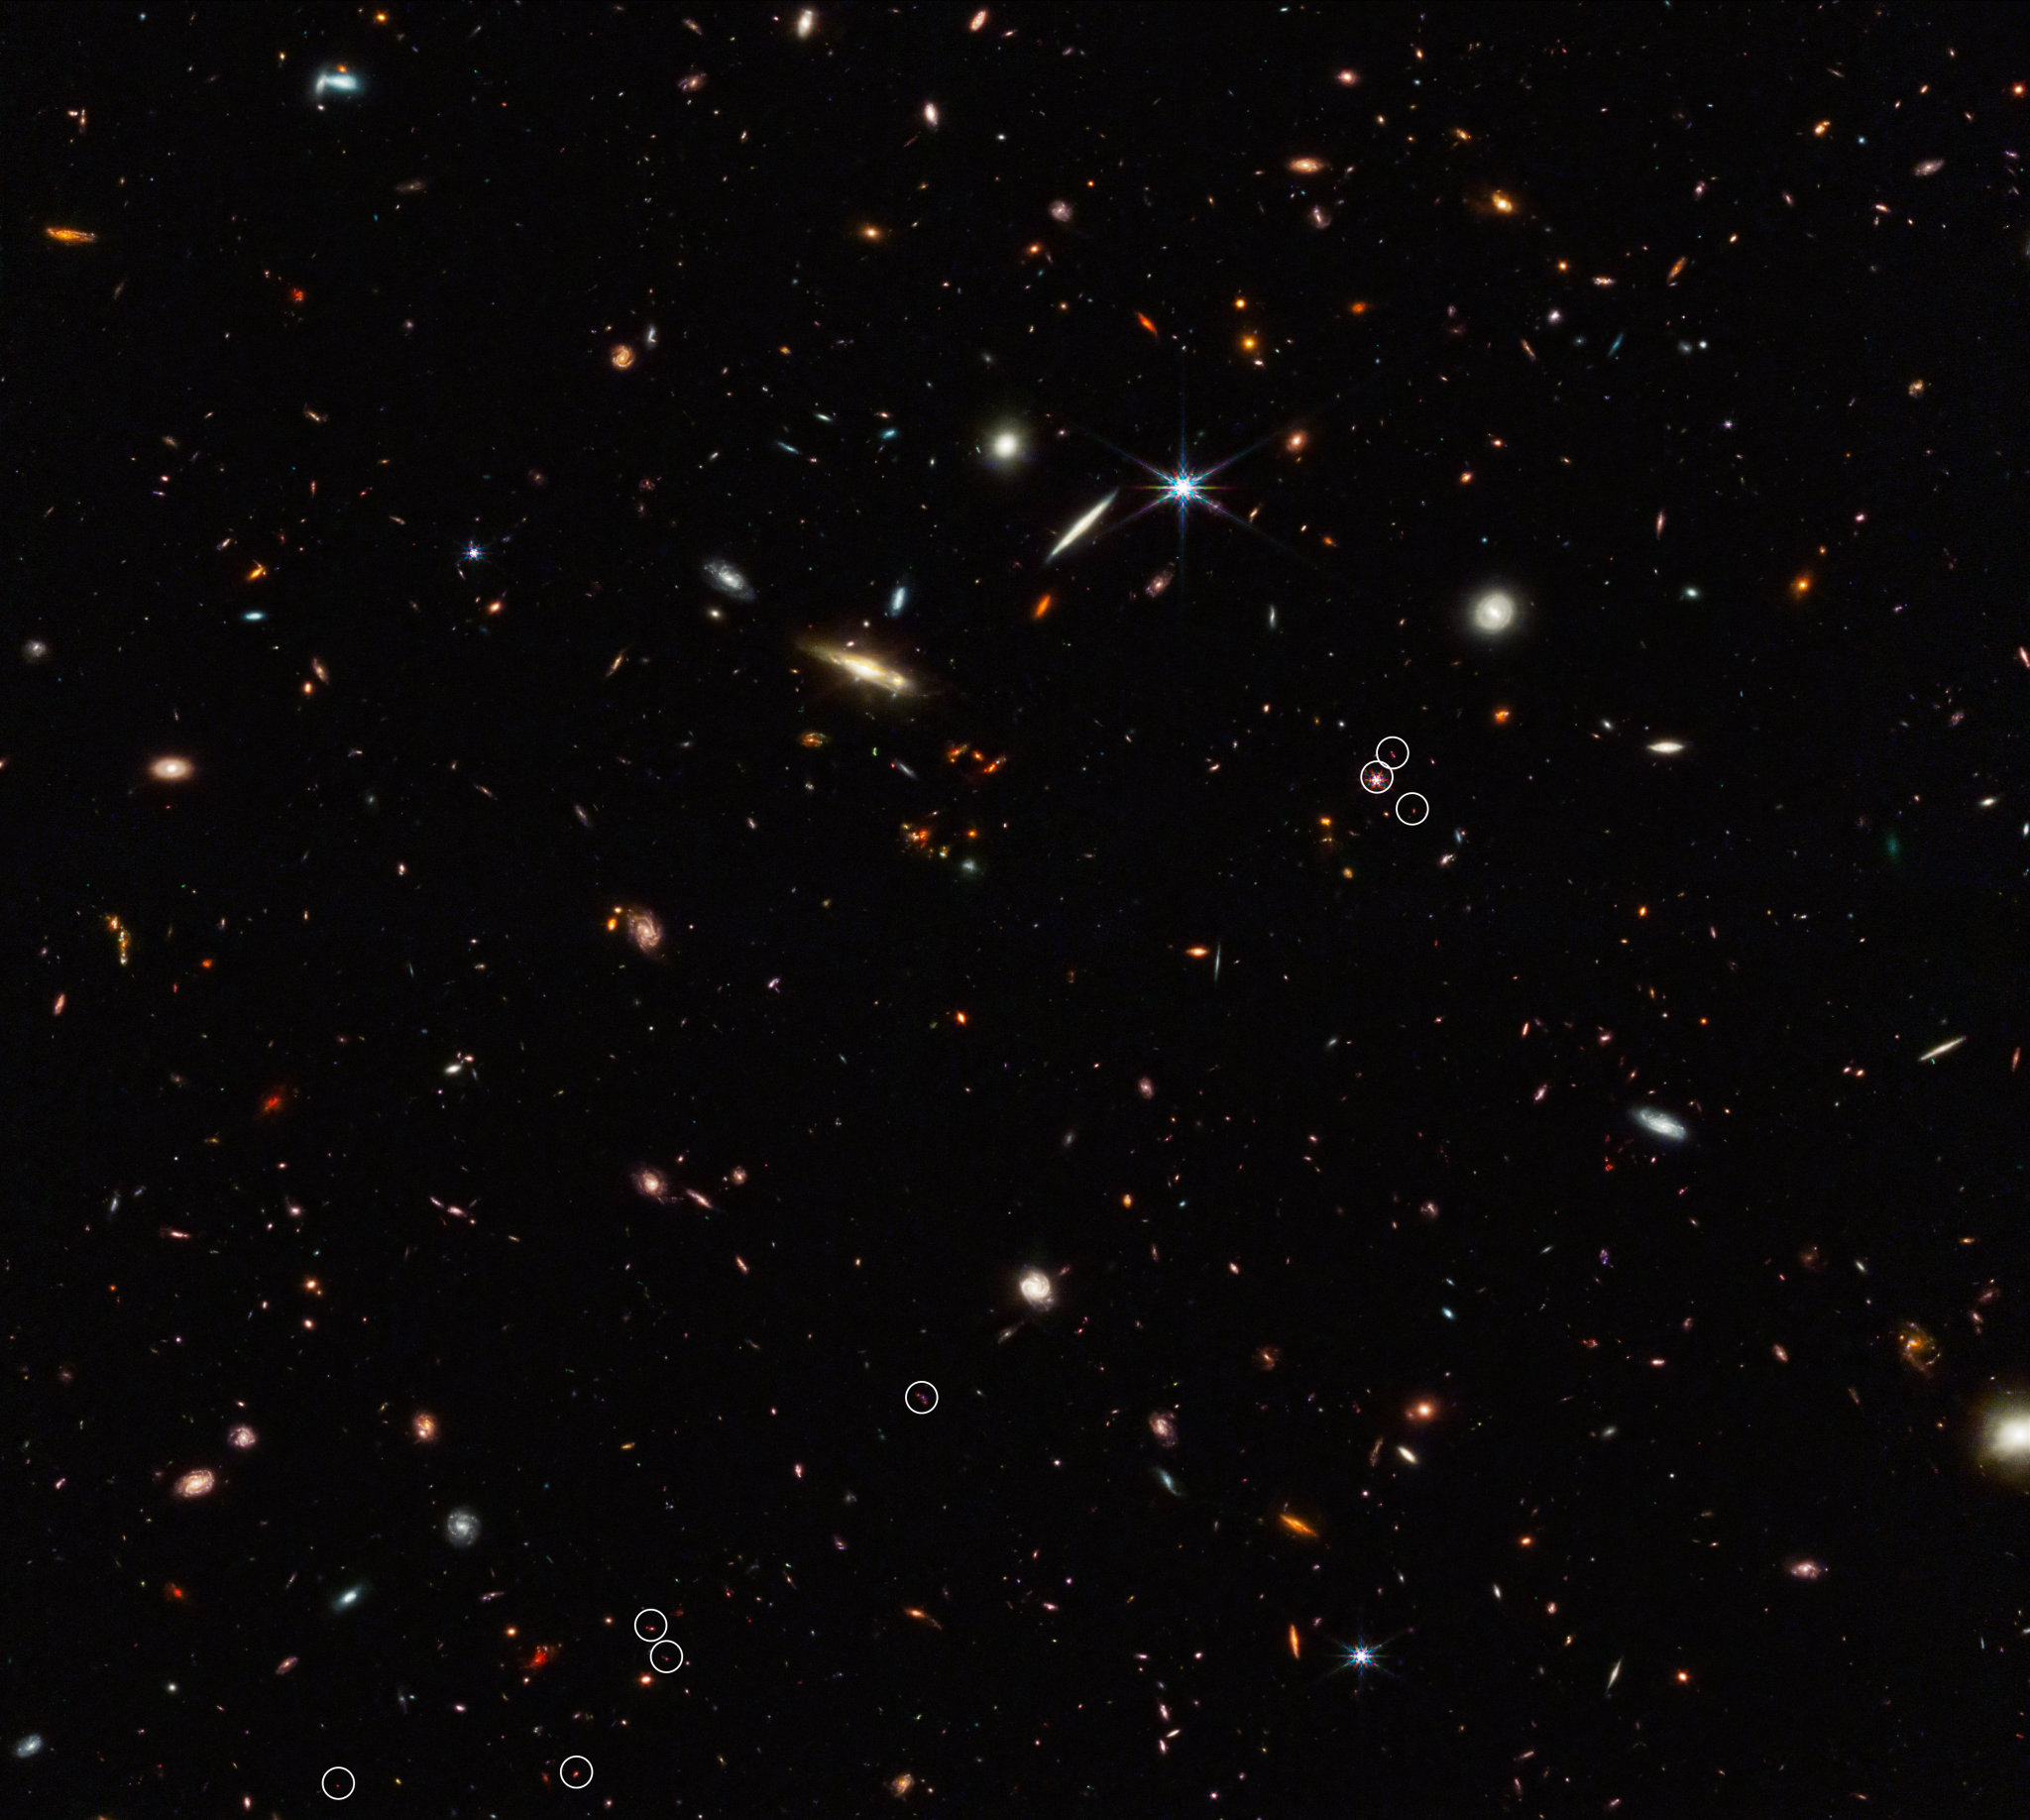 A deep field image with many colorful galaxies and six-pointed stars sprinkled across deep black space. Small white circles scattered across the center and lower left mark ten galaxies that existed just 830 million years after the Big Bang.